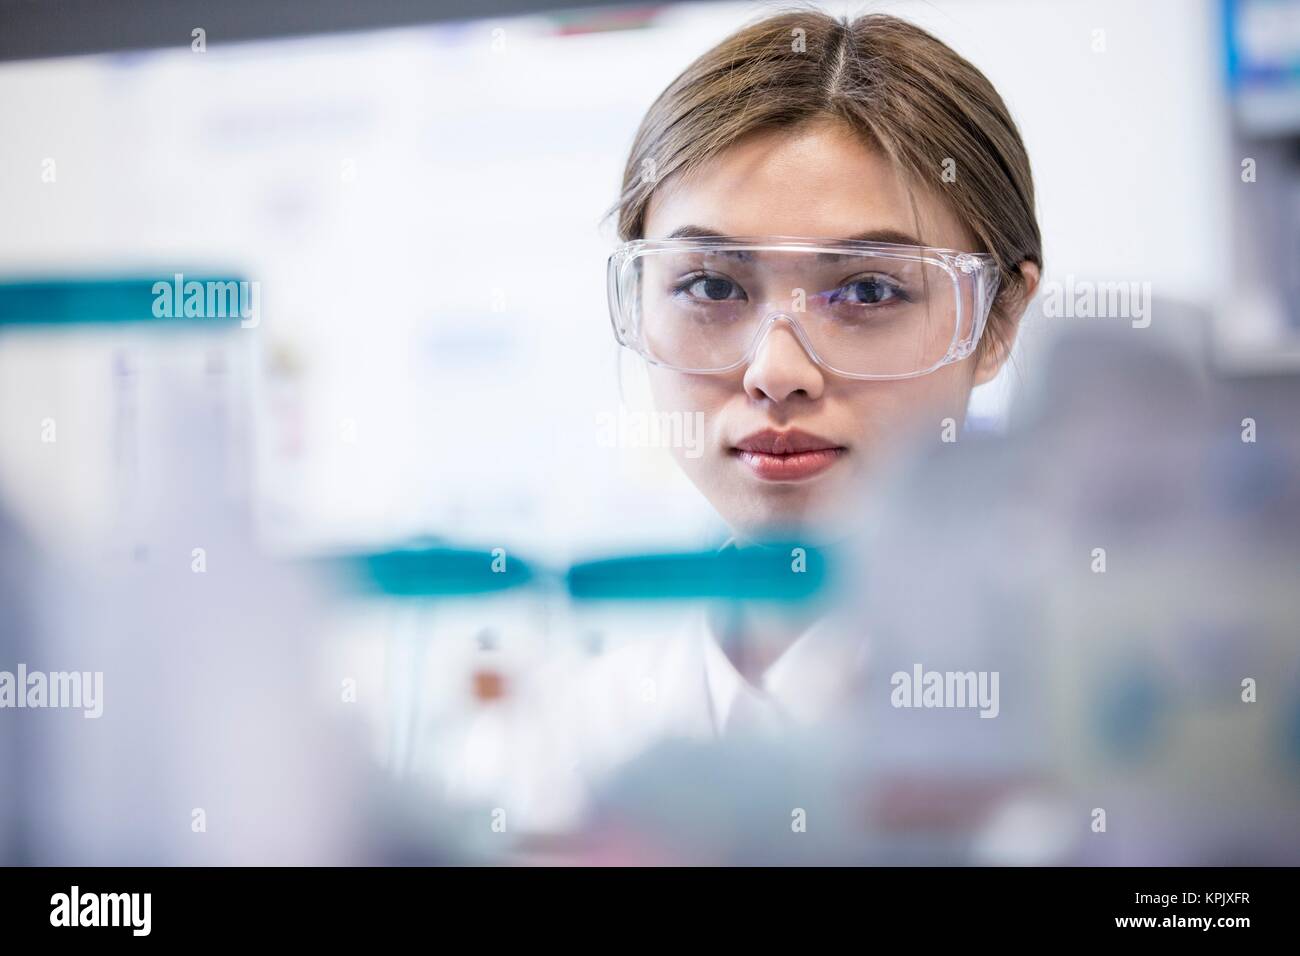 Female laboratory assistant wearing safety goggles. Stock Photo